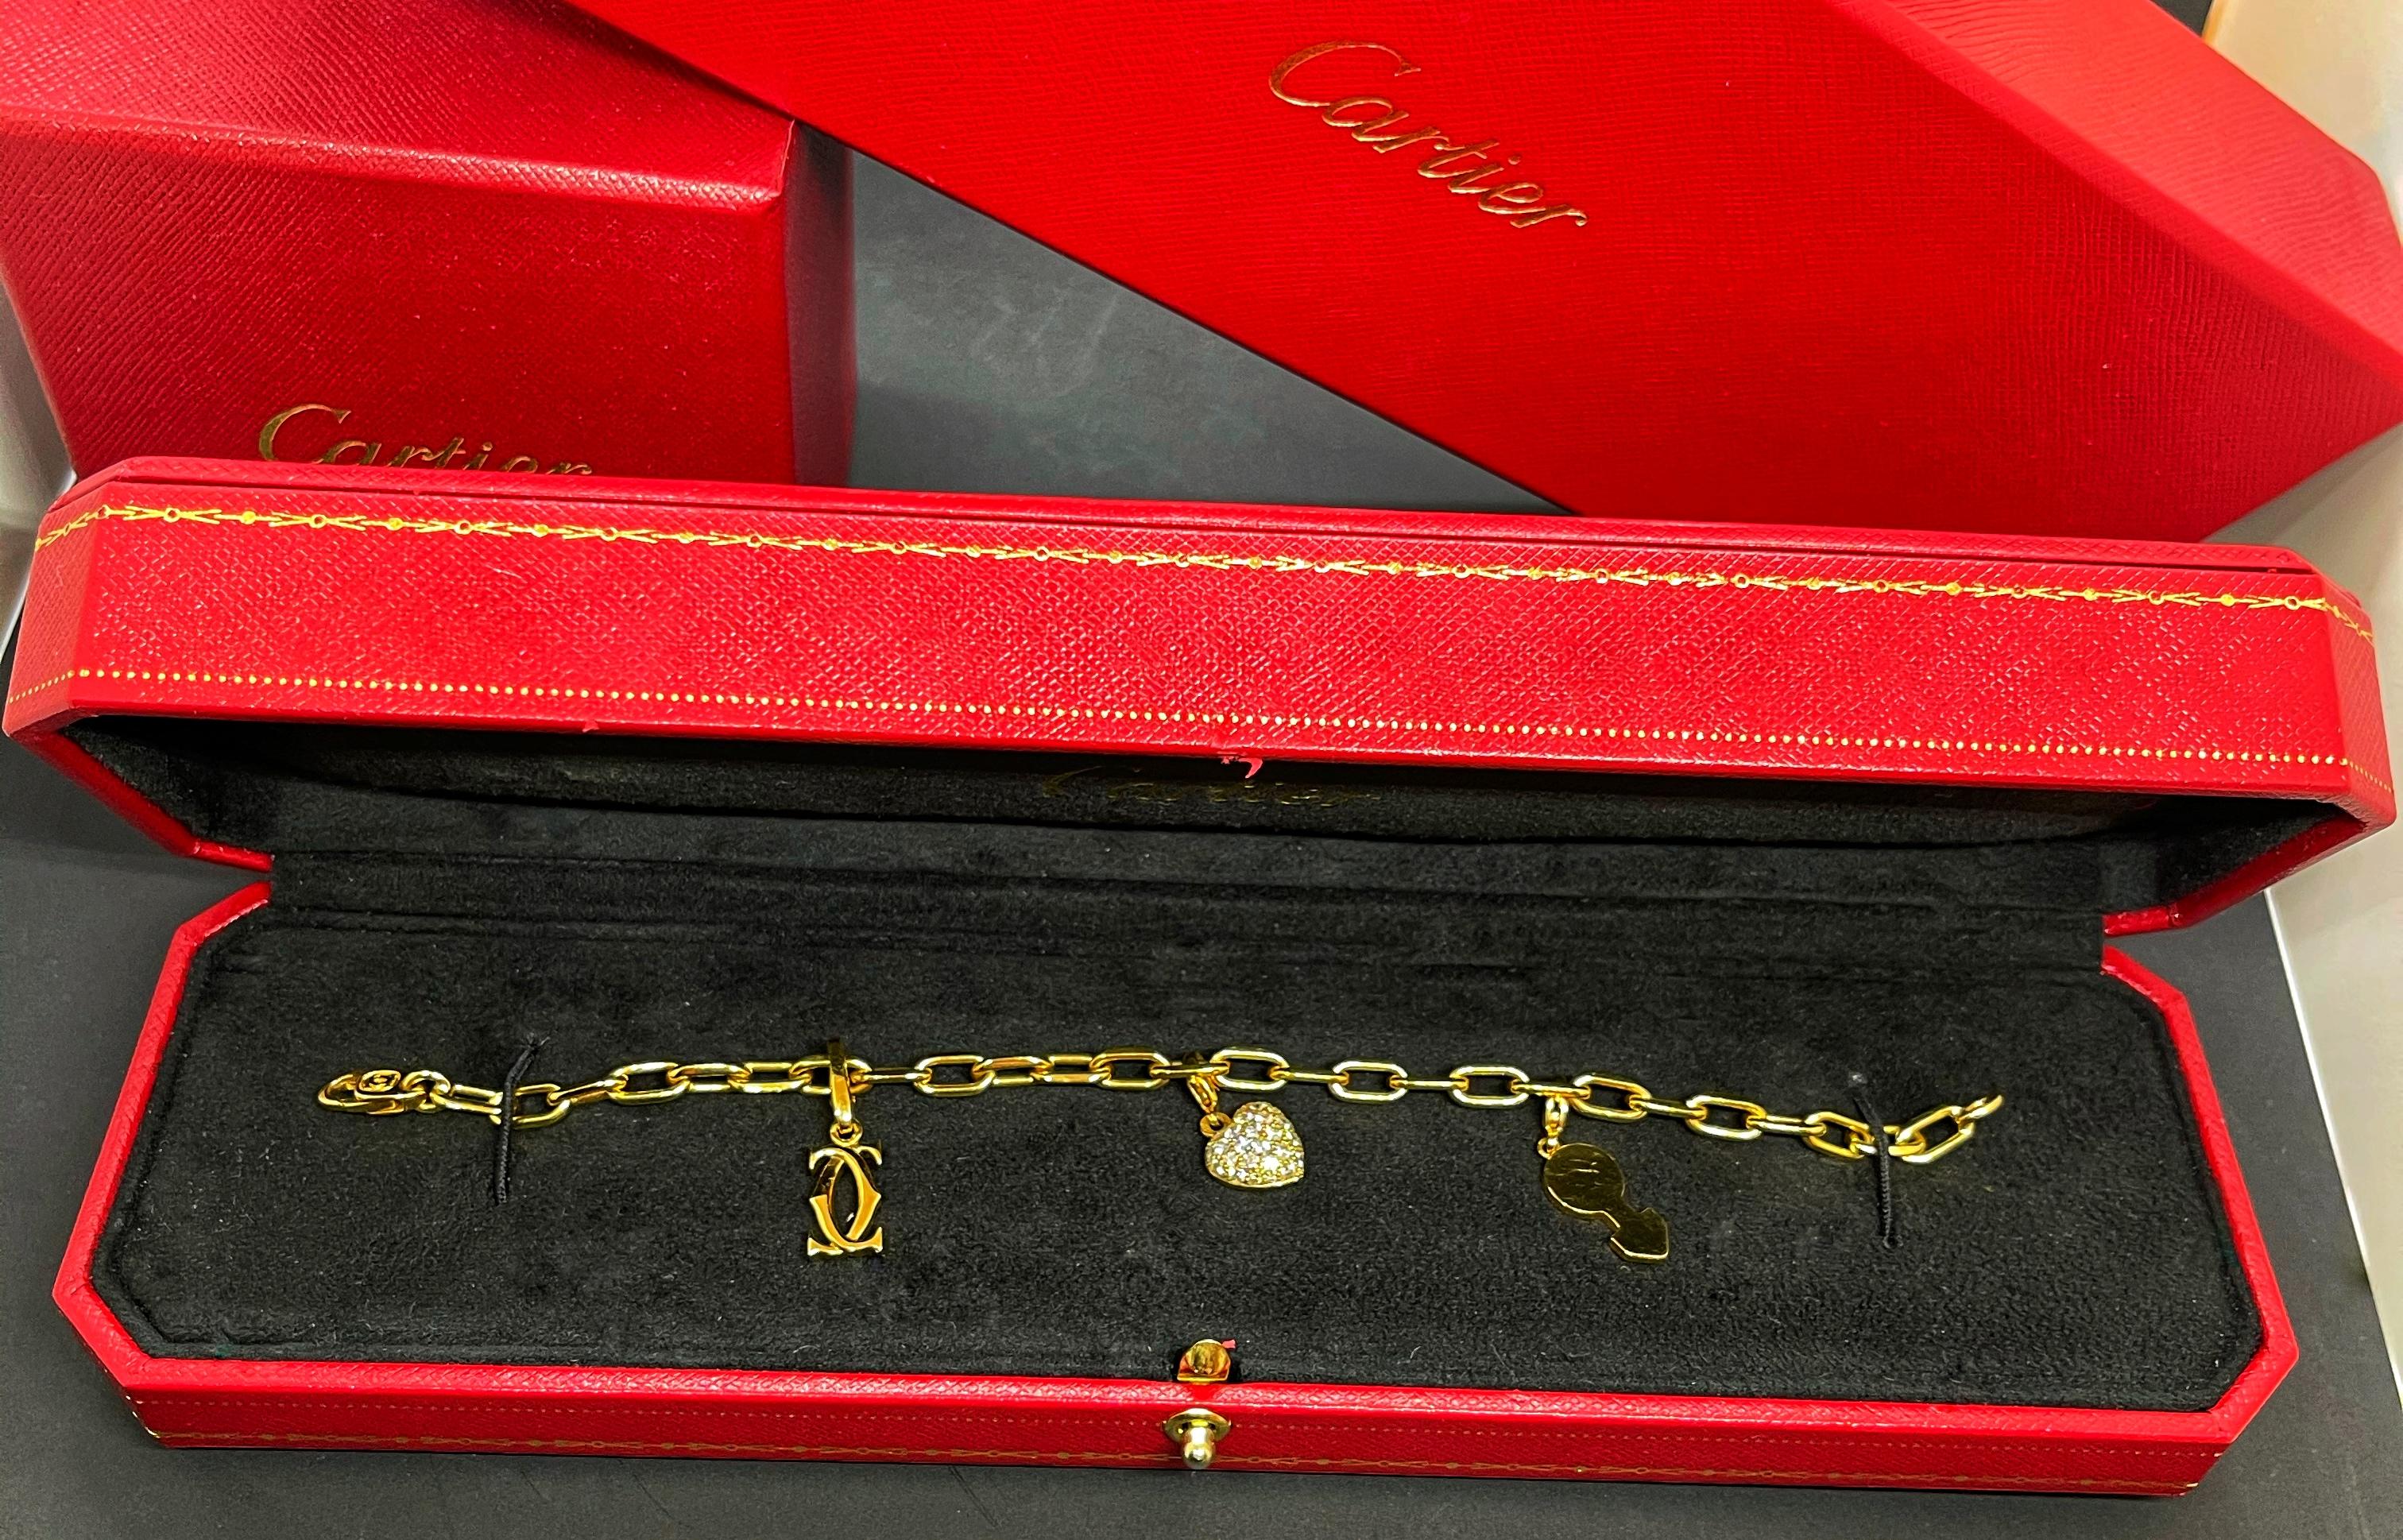 100% AUTHENTIC beautiful Cartier Charm Bracelet

Crafted in 18 Karat Gold stocky chain bracelet designed by the legendary French jewellery house Cartier. The chain. bracelet decorated with three charms represented the iconic images associated with